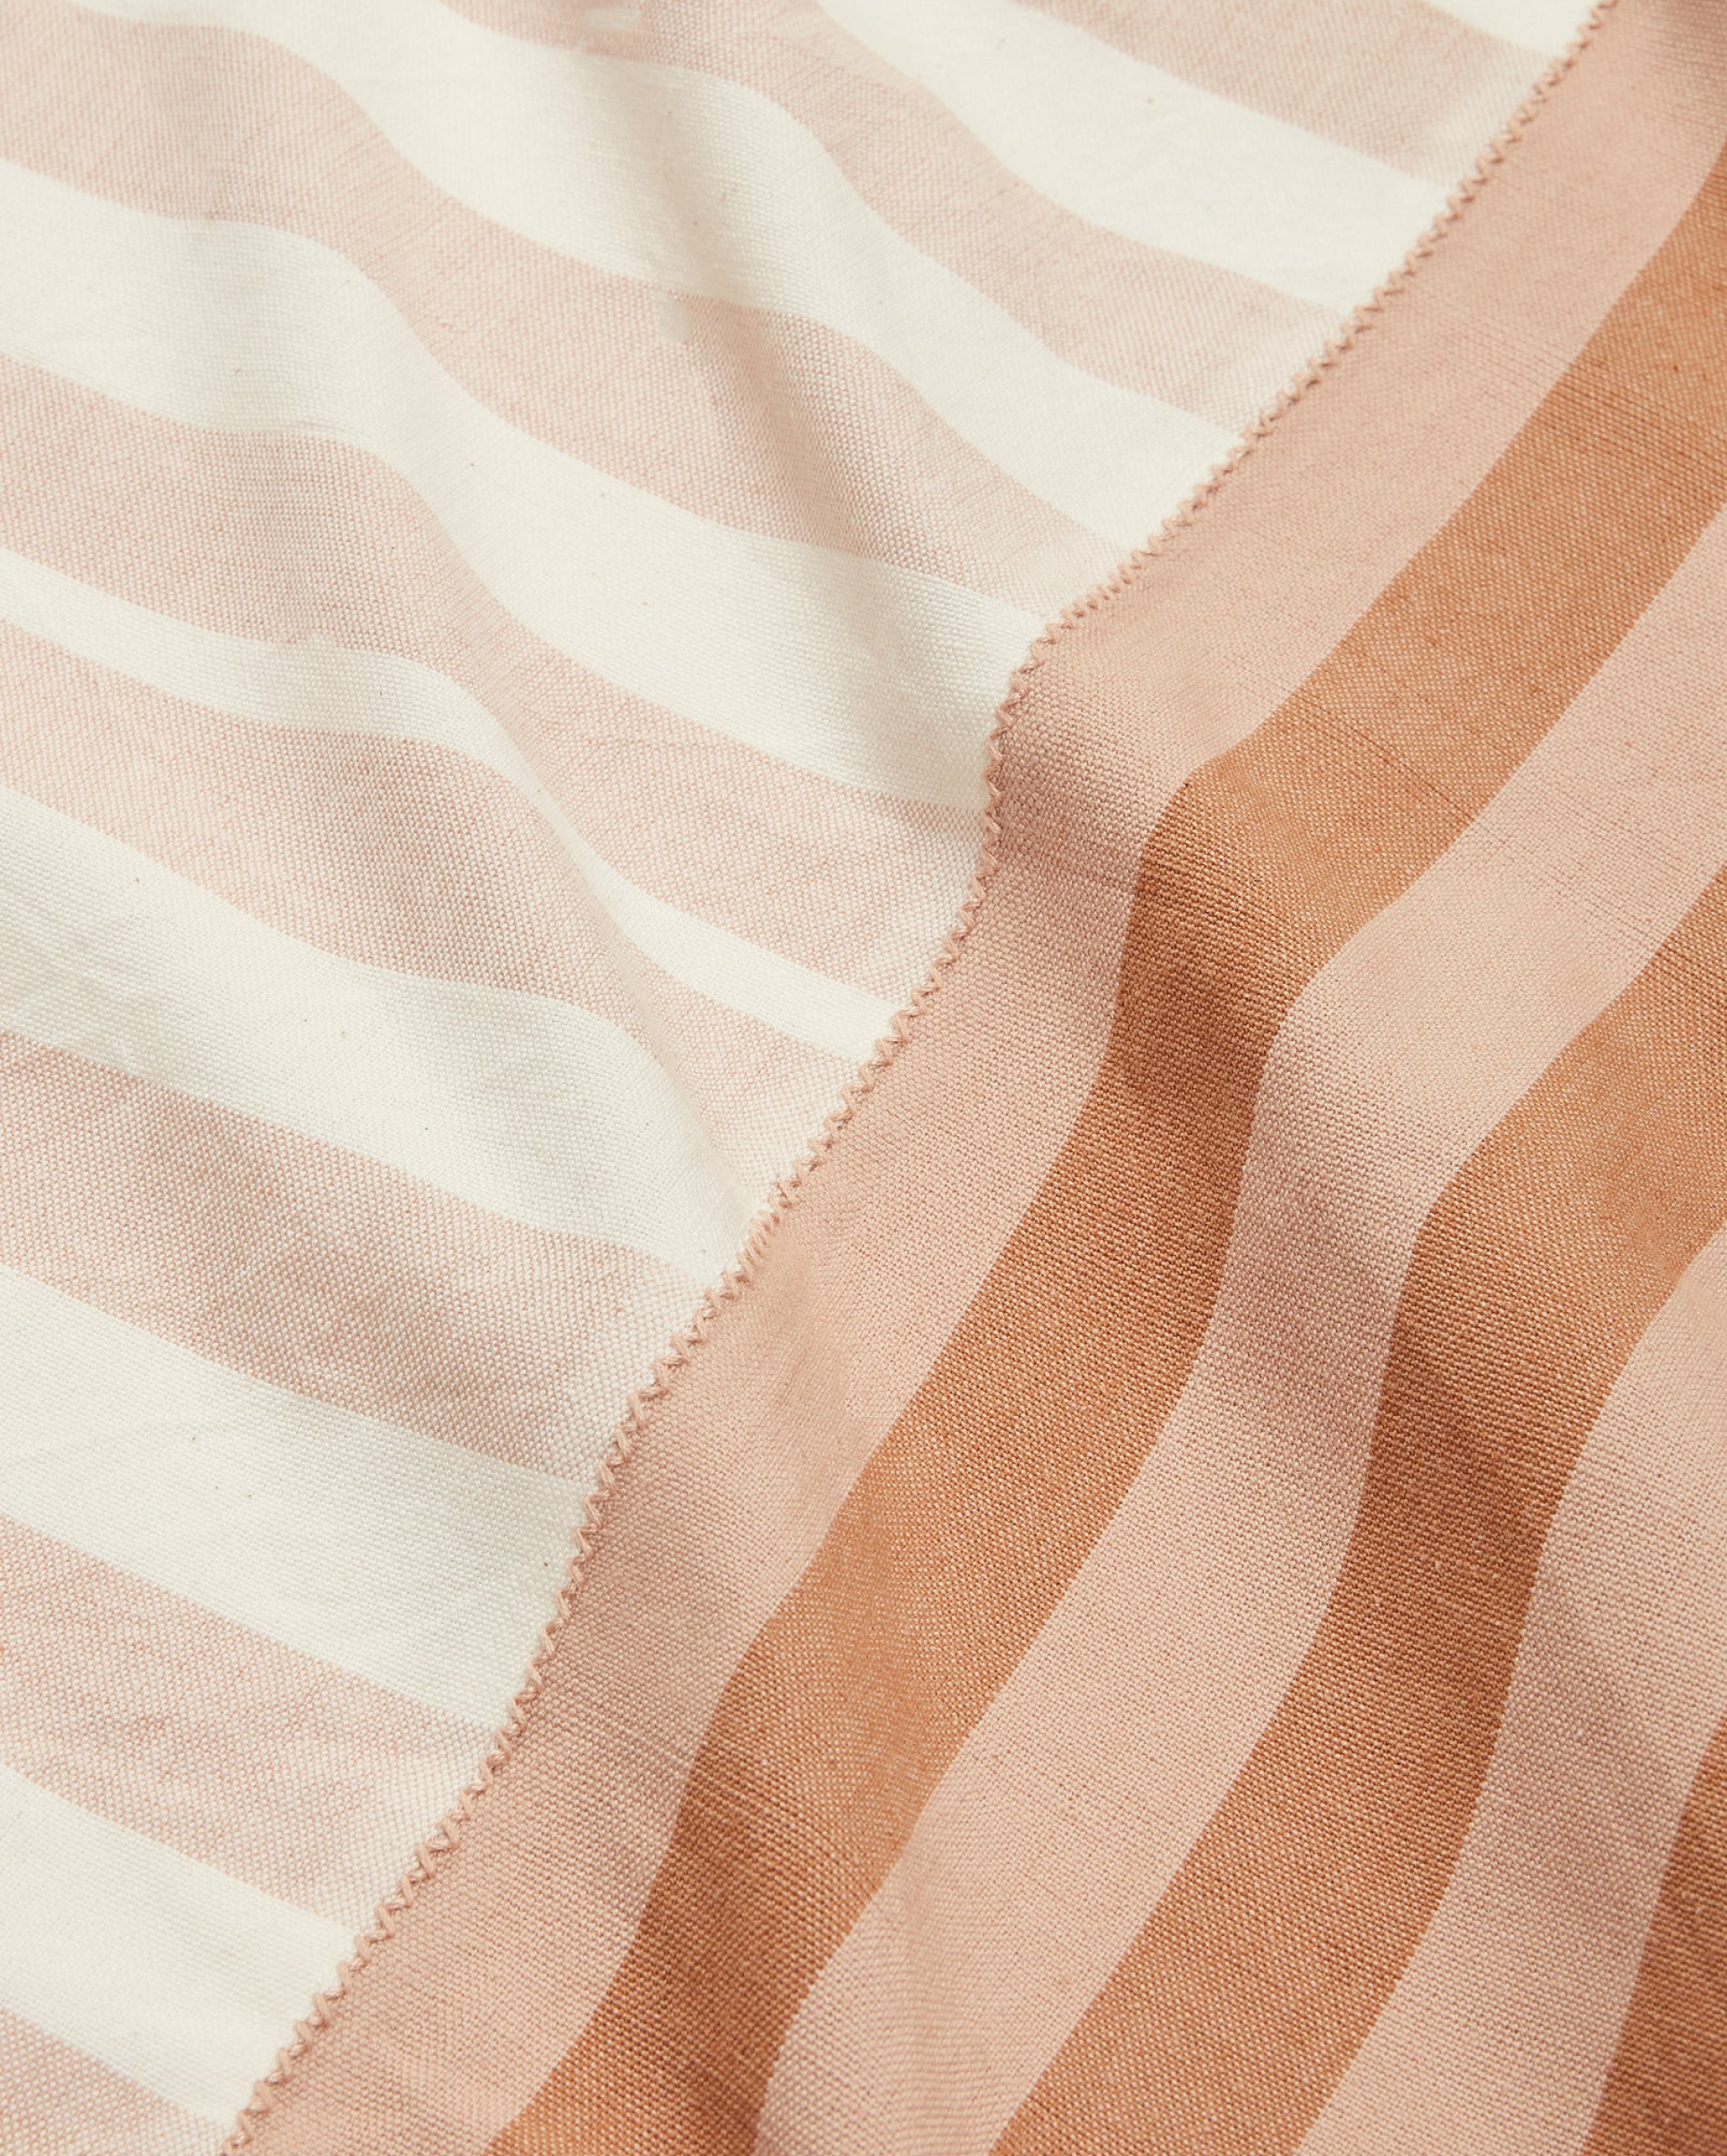 close-up of striped cotton tablecloth ethically handwoven by MINNA in neutral beige and light brown.